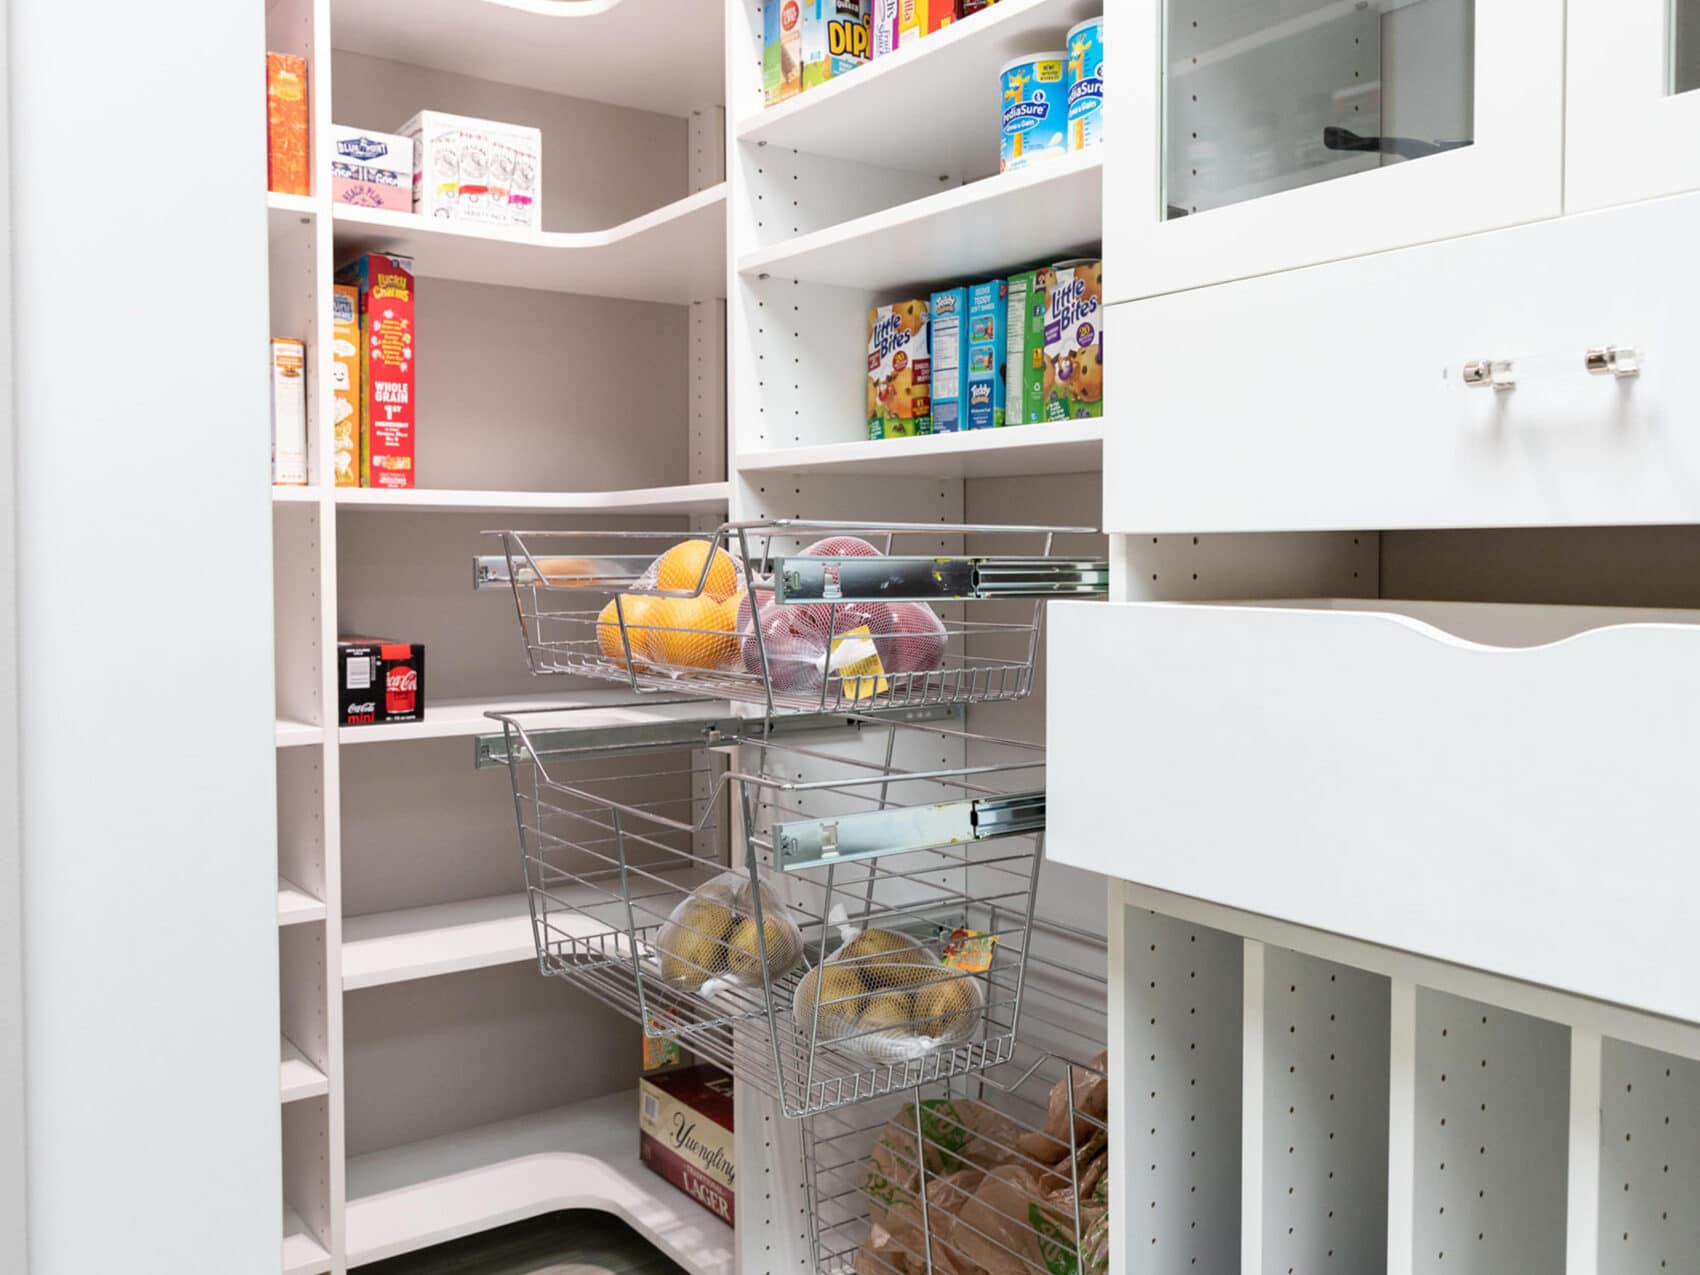 A custom kitchen and pantry storage installation